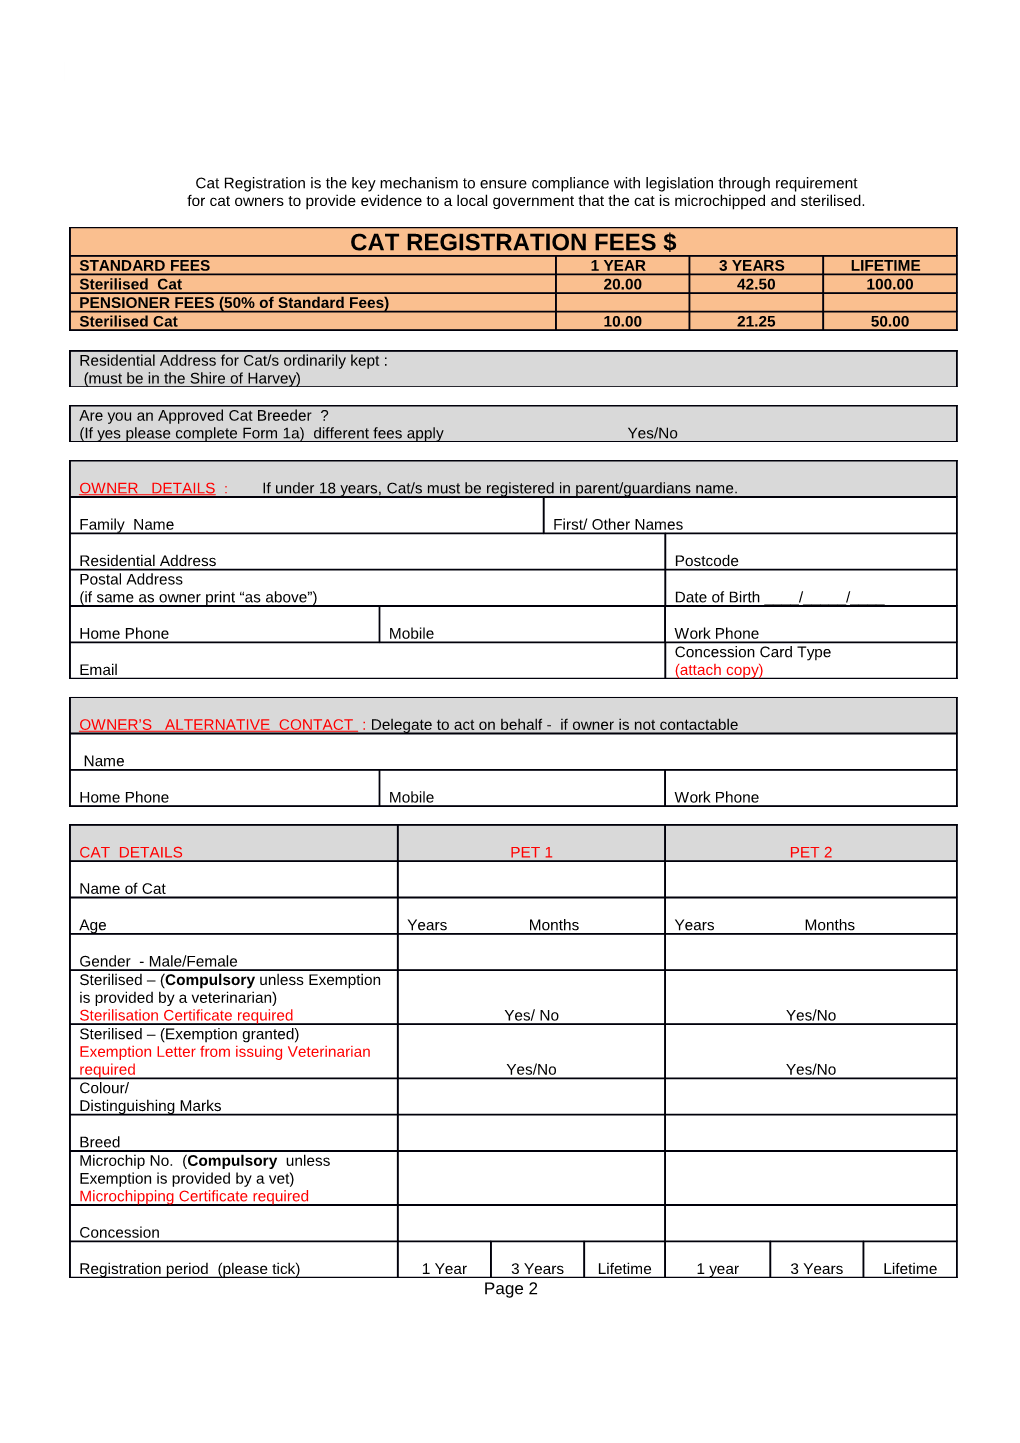 Cat Registration Is the Key Mechanism to Ensure Compliance with Legislation Through Requirement